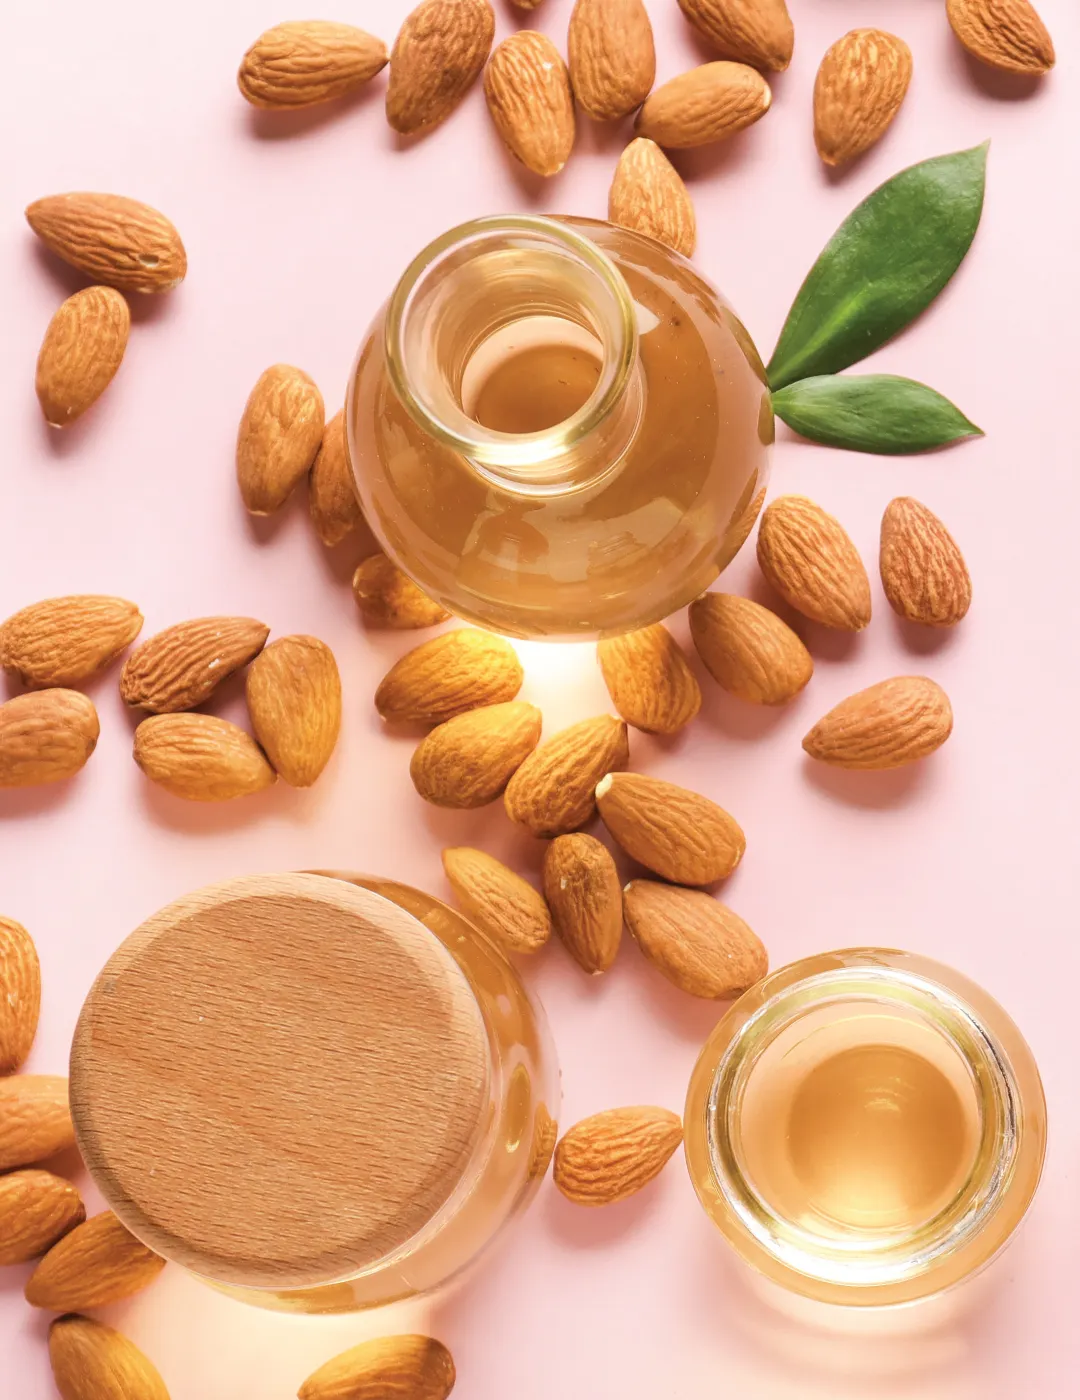 health benefits in eating almonds